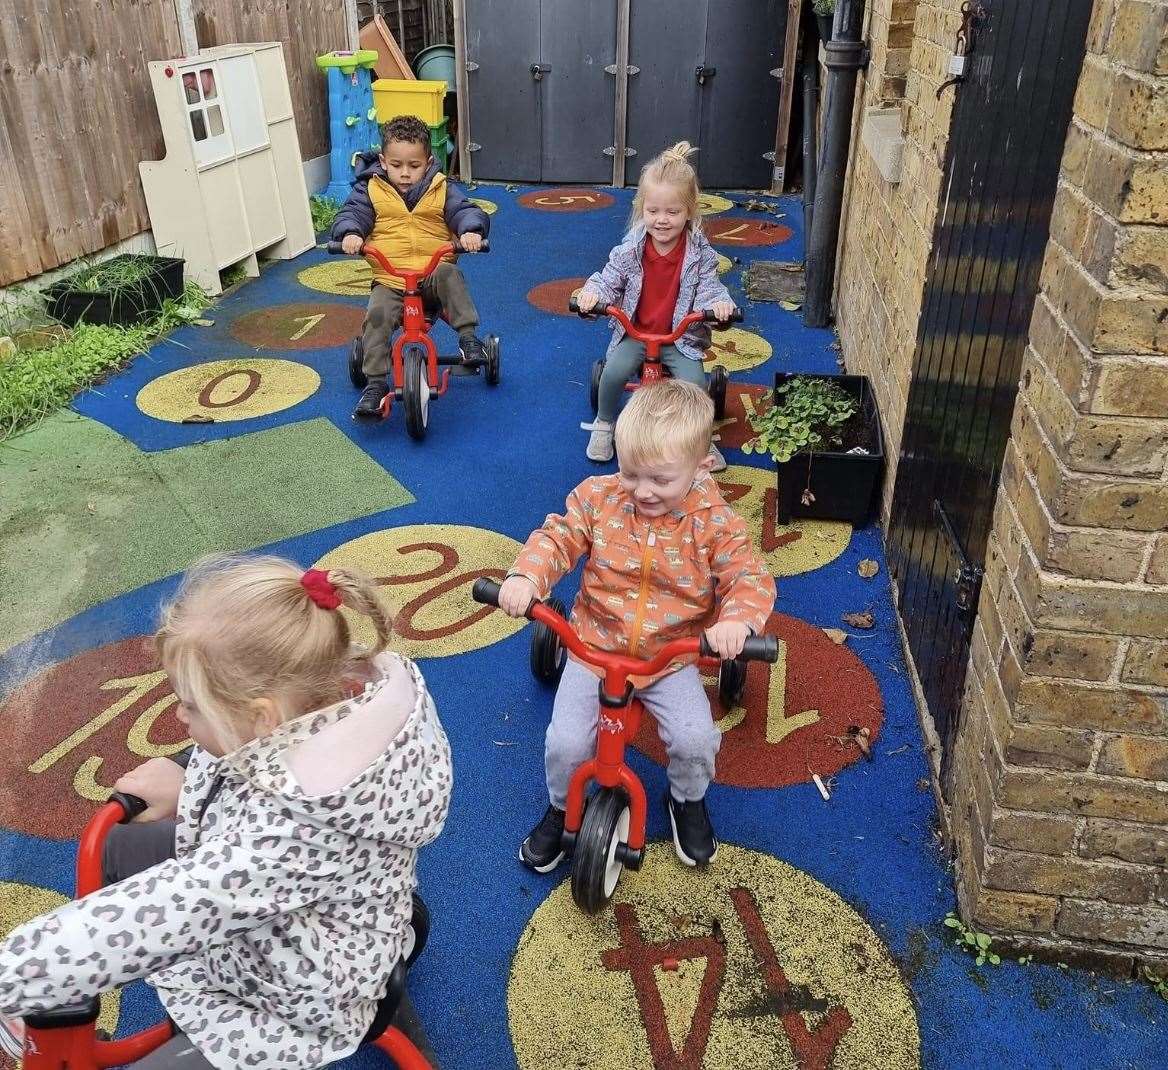 The school provides early education and childcare. Picture: Naomi Ruth